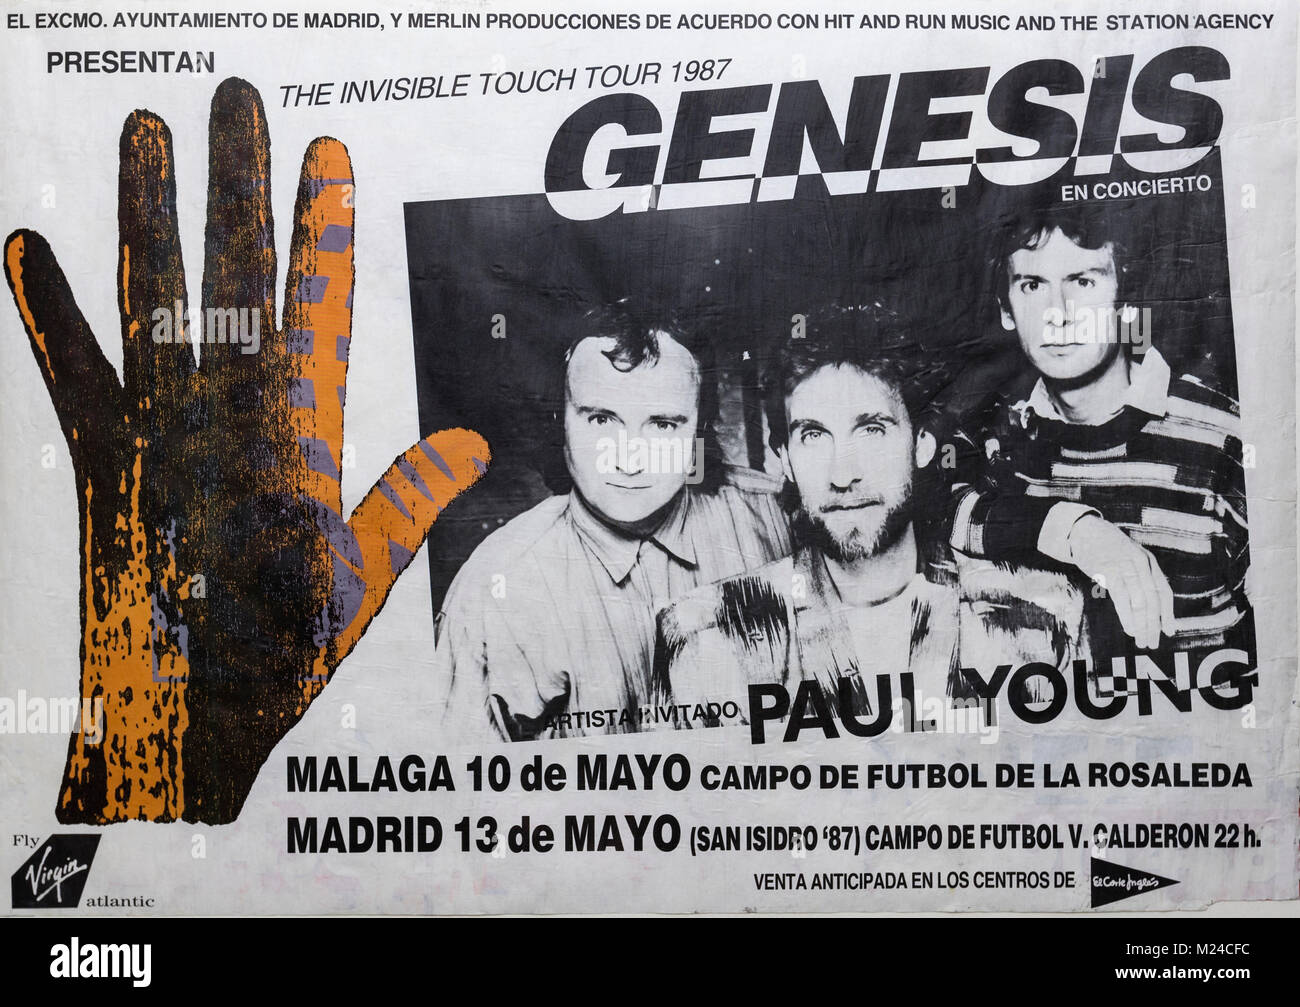 Genesis in concert with Paul Young, The invisible Touch Tour, Musical concert poster Stock Photo